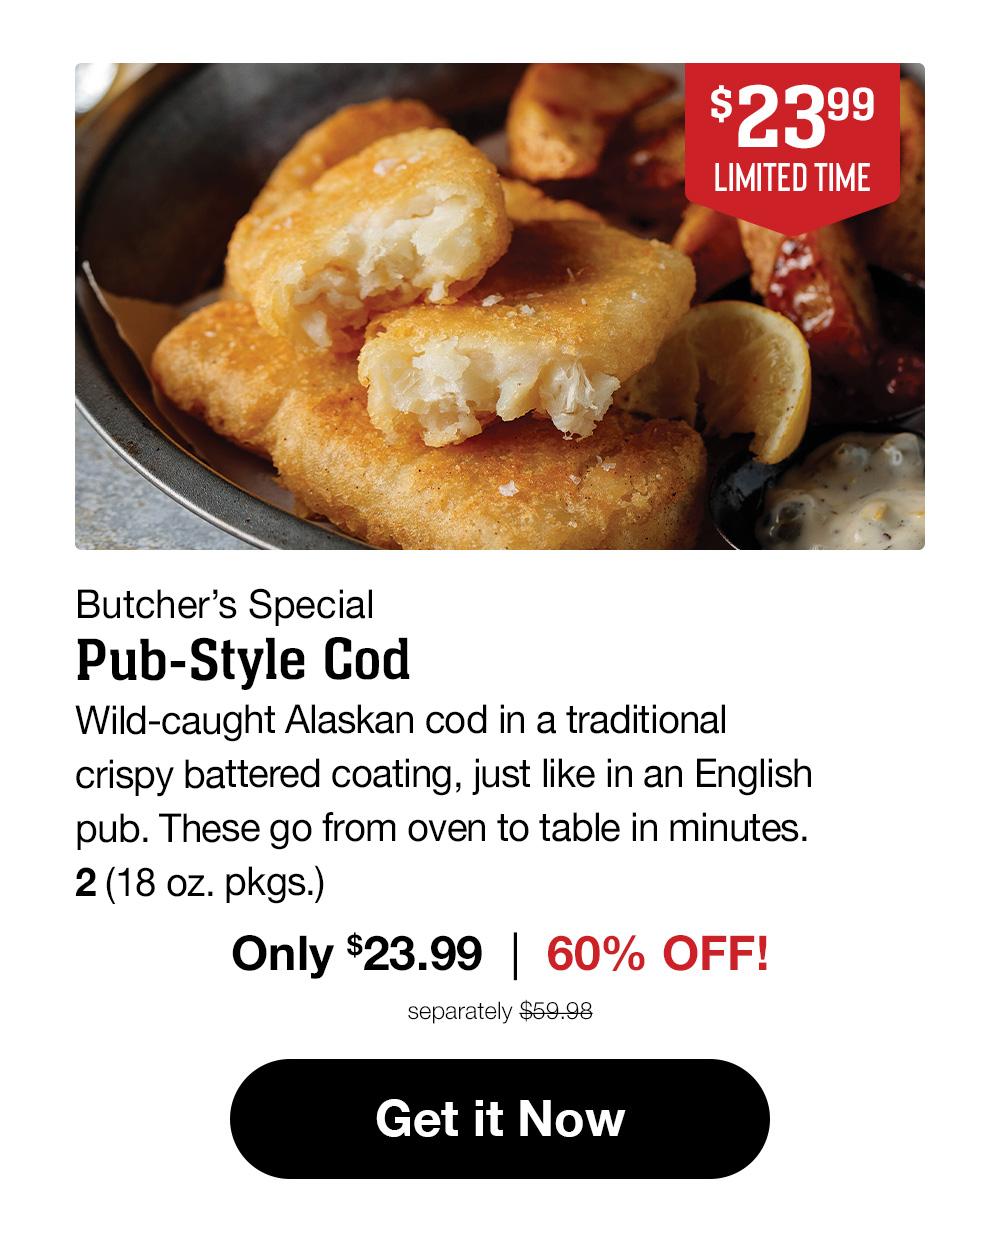 Butcher's Special | Pub-Style Cod - Wild-caught Alaskan cod in a traditional crispy battered coating, just like in an English pub. These go from oven to table in minutes. 2 (18 oz. pkgs.) Only $23.99  |  60% off! separately $59.98